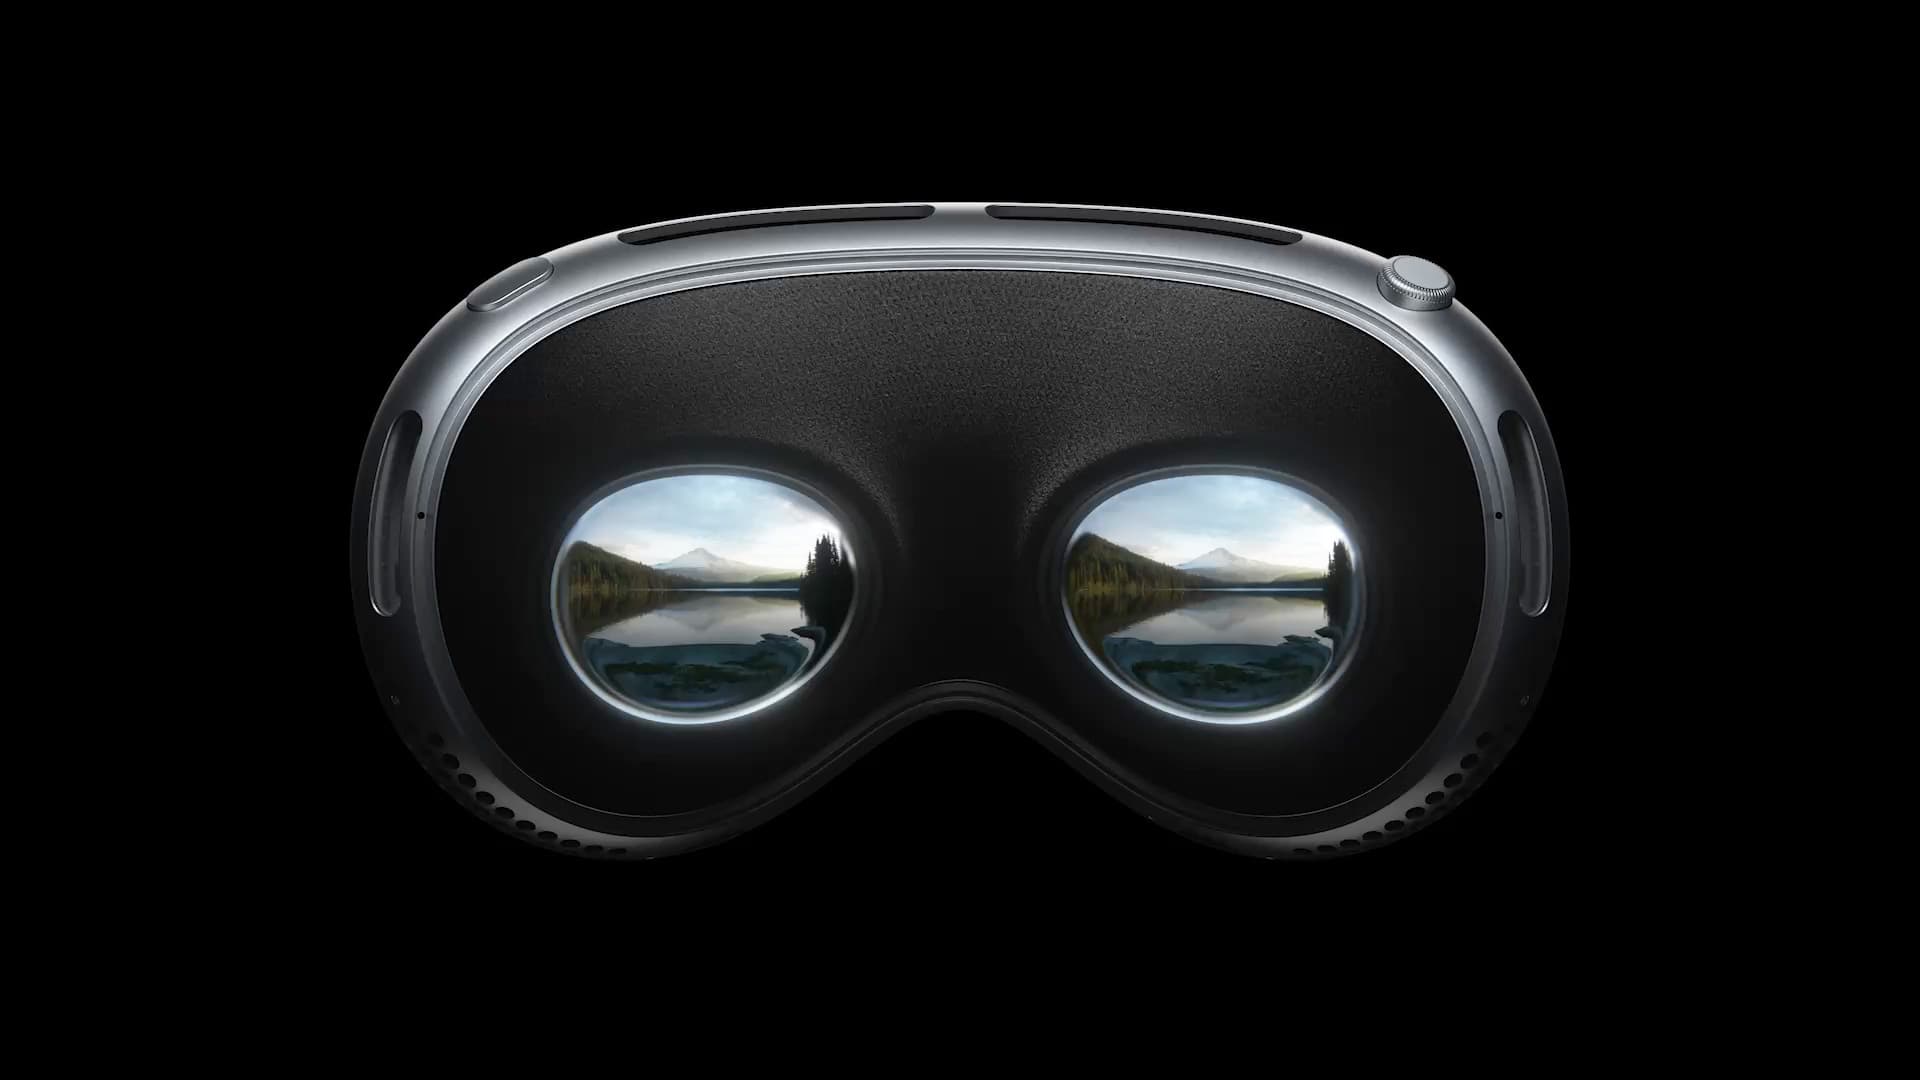 the limited Field Of View (FOV) of Apple’s product will still block the users natural perriferal vision